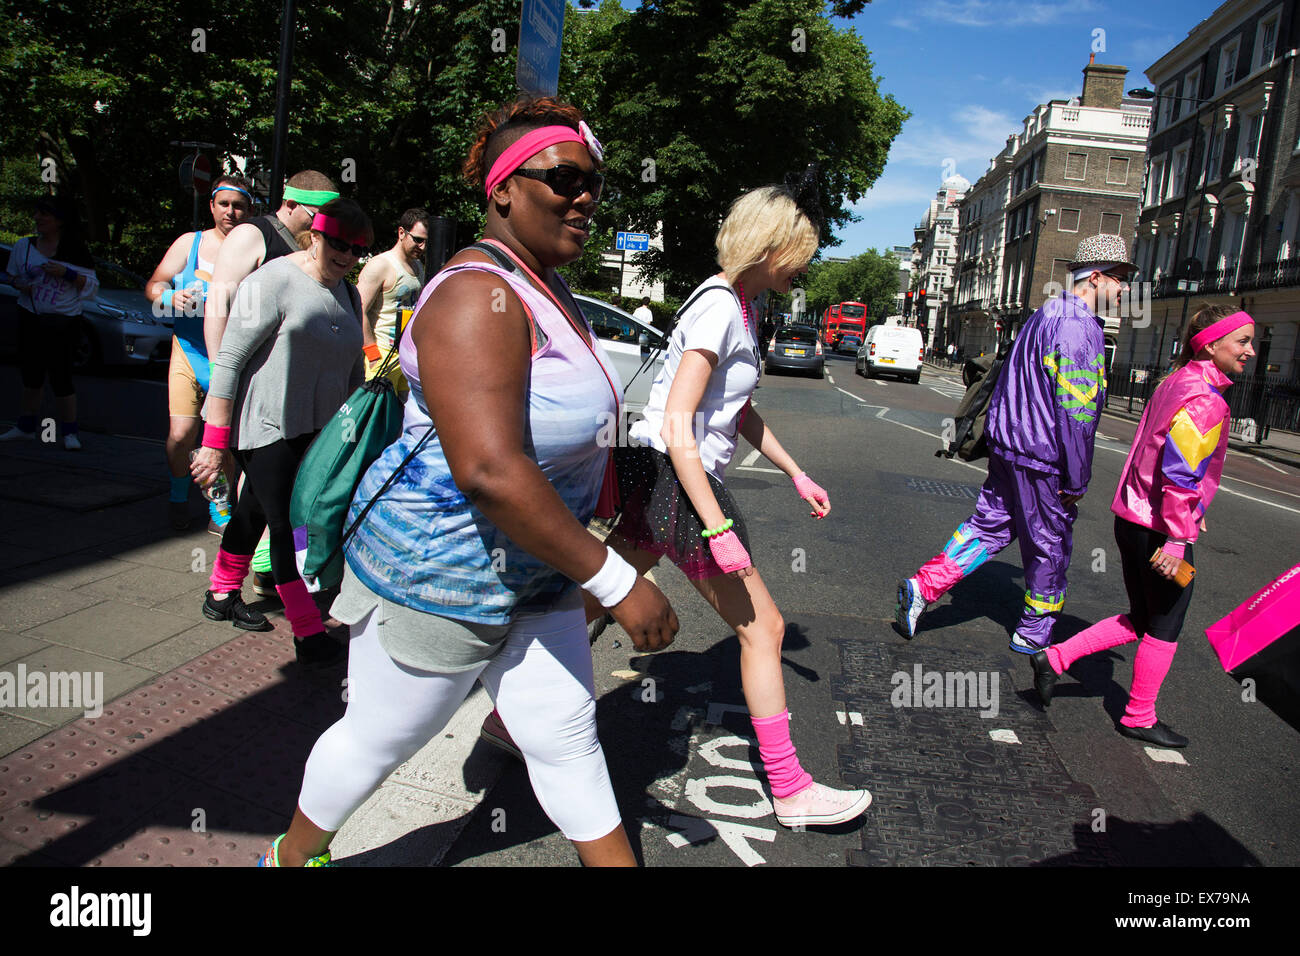 Summertime in London, England, UK. Group of friends out and about dressed up in 1980s brightly coloured clothing. It is a common sight to see groups like this dressing up to enjoy a party or celebration of some kind. Stock Photo